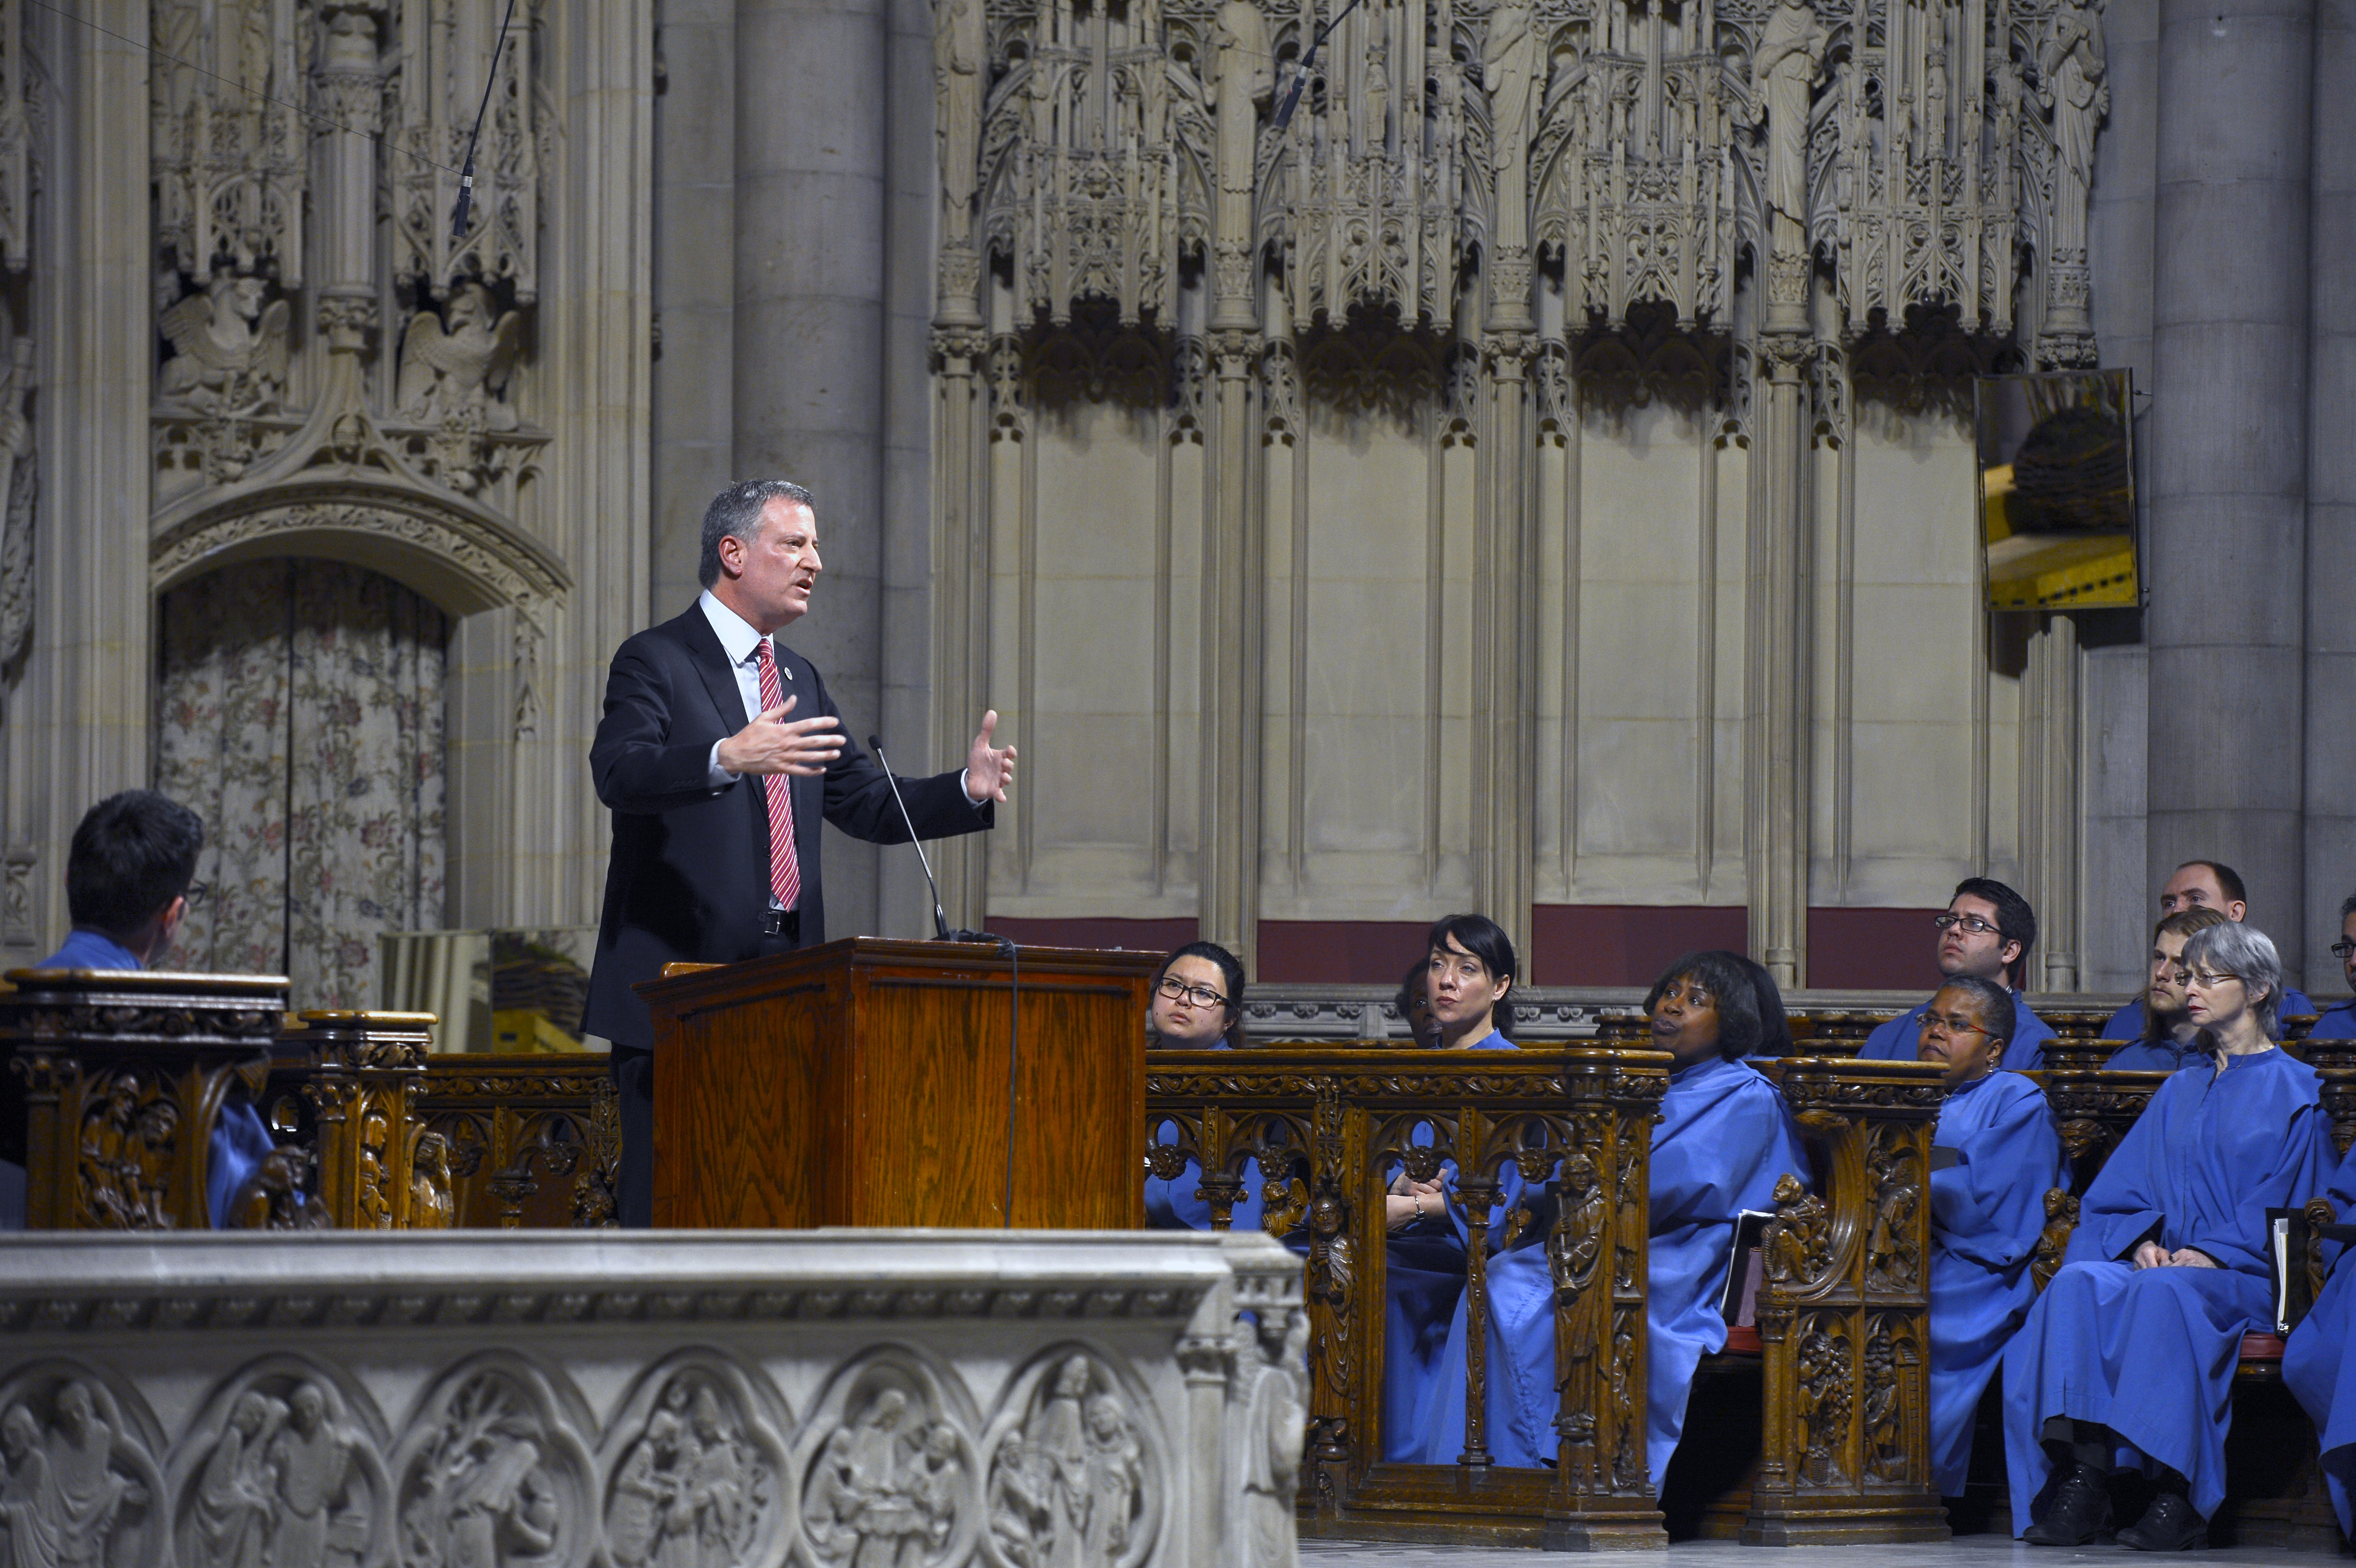 Mayor Bill de Blasio delivers remarks on his education vision for New York City at Riverside Church in Manhattan on Sunday, March 23, 2014. (Rob Bennett for the Office of Mayor Bill de Blasio)